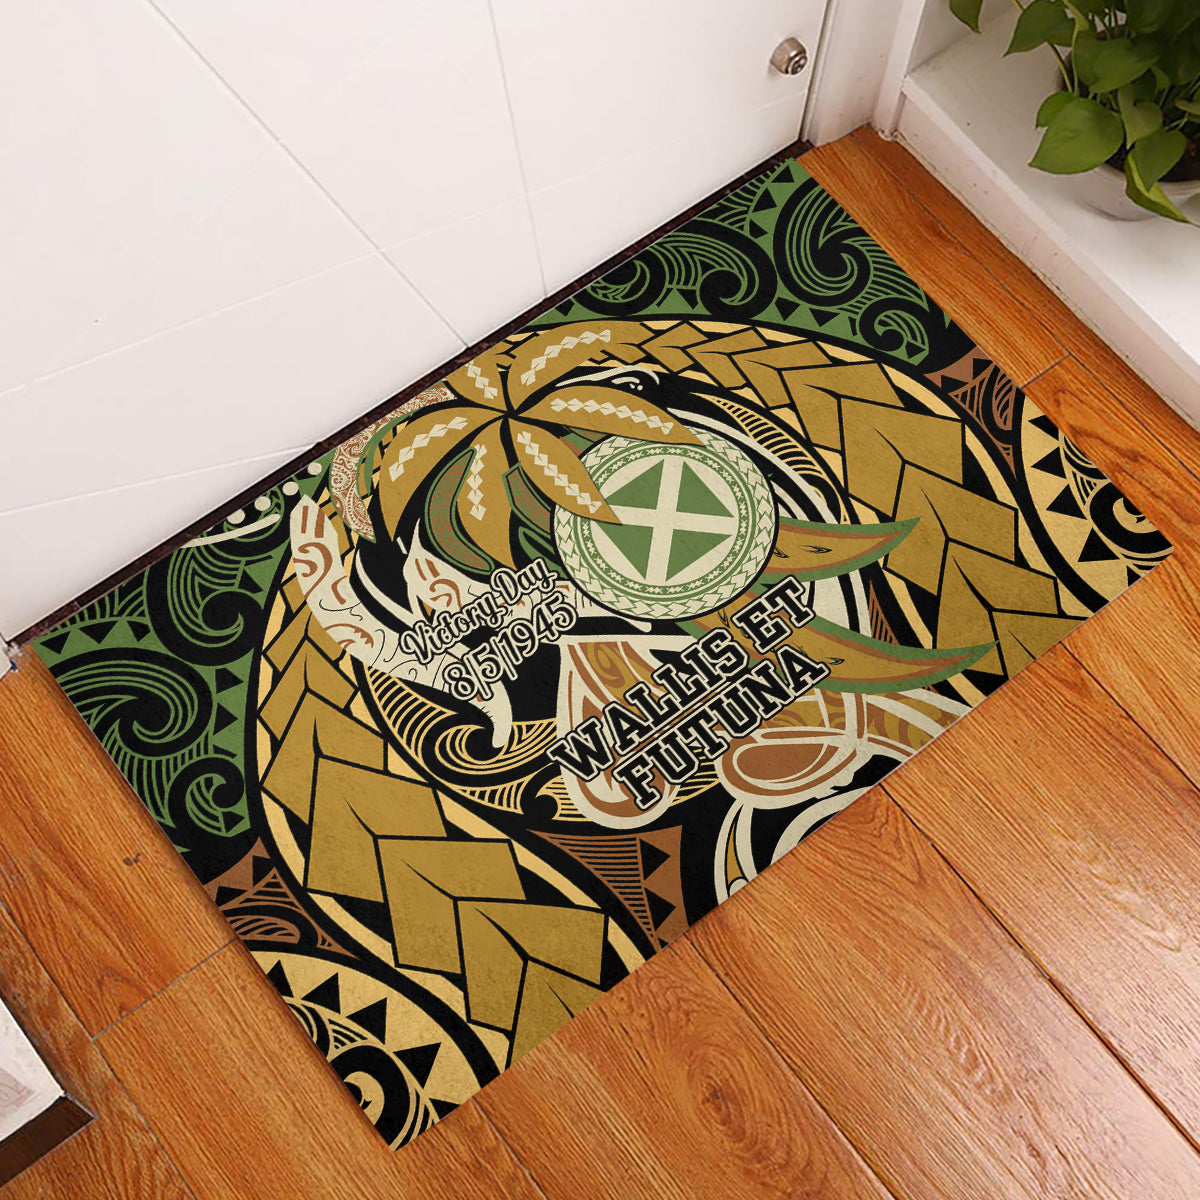 Wallis and Futuna Victory Day Rubber Doormat Since 1945 with Polynesian Platinum Floral Tribal